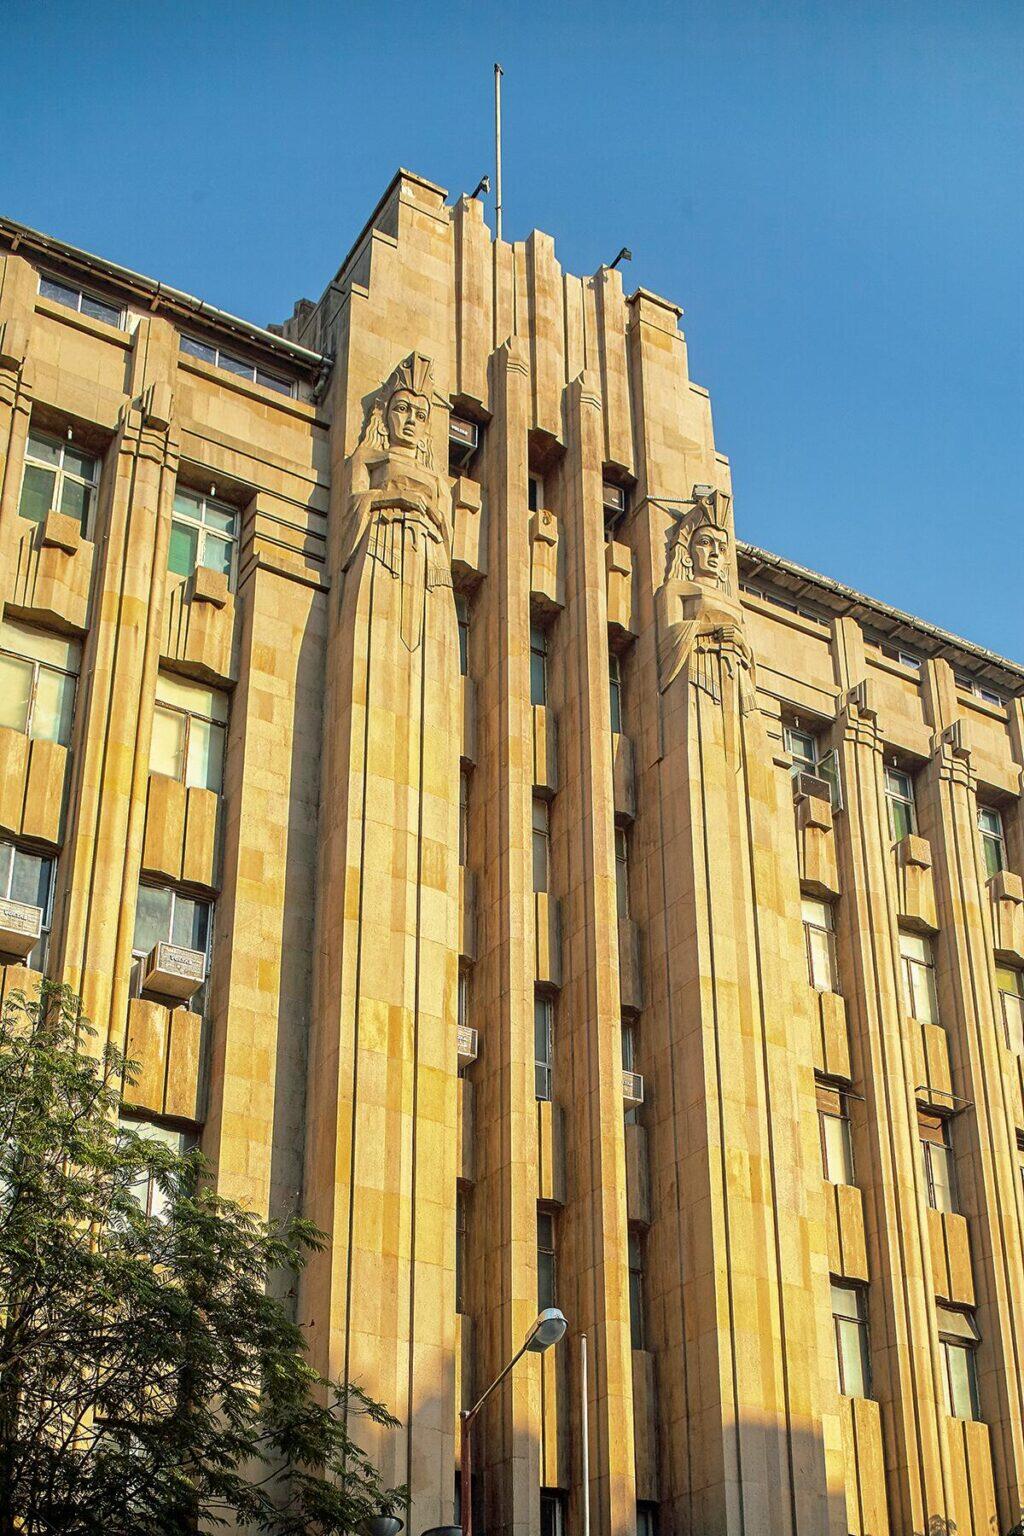 The 10 Most Beautiful Art Deco Style Structures in the World